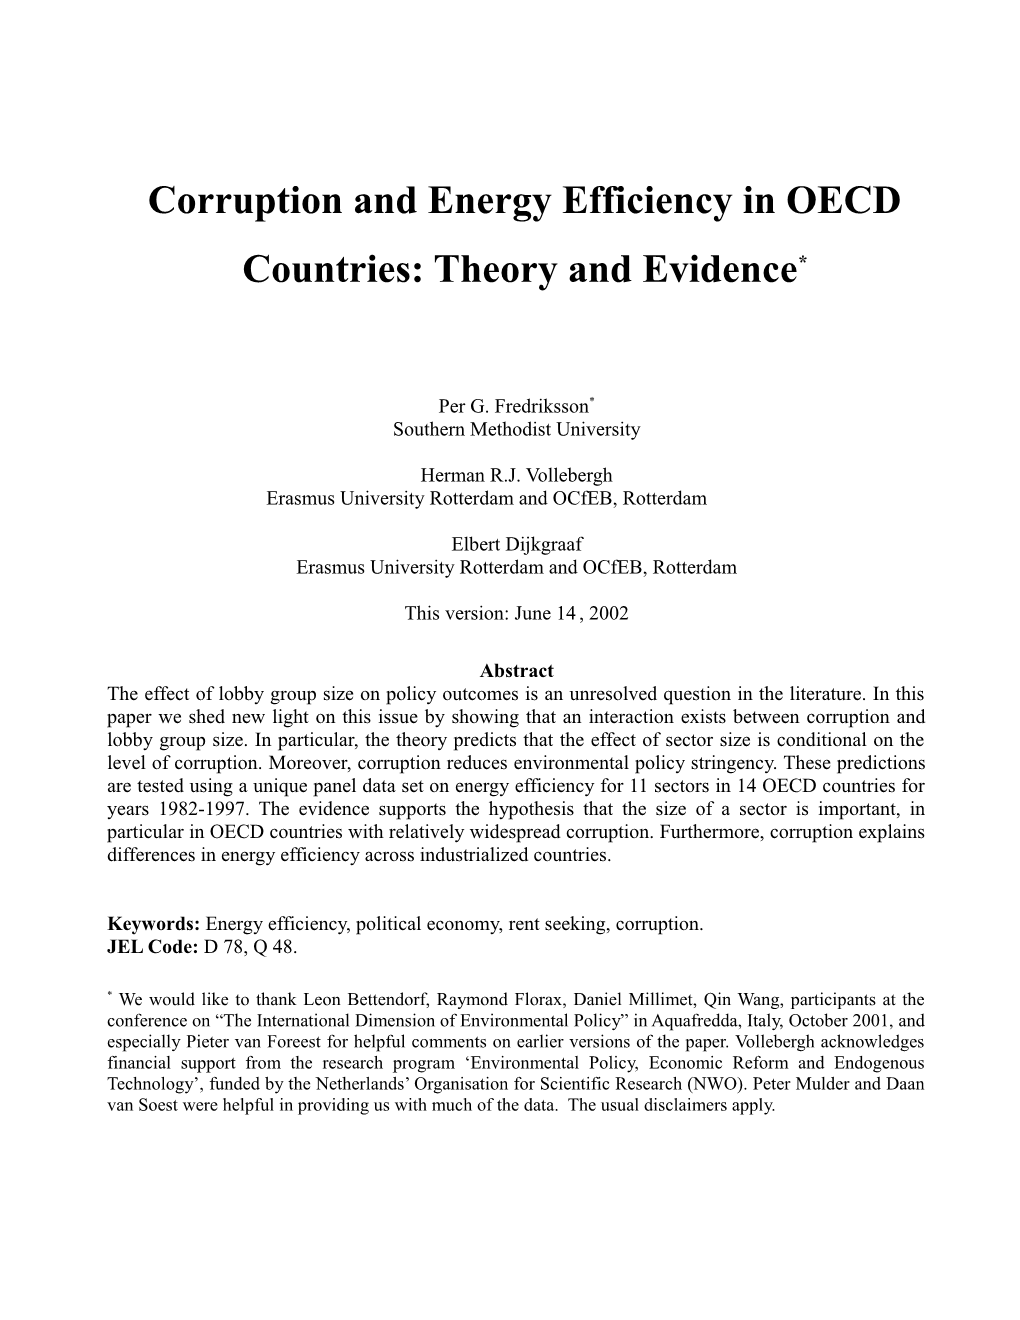 Corruption and Energy Efficiency in OECD Countries: Theory and Evidence*